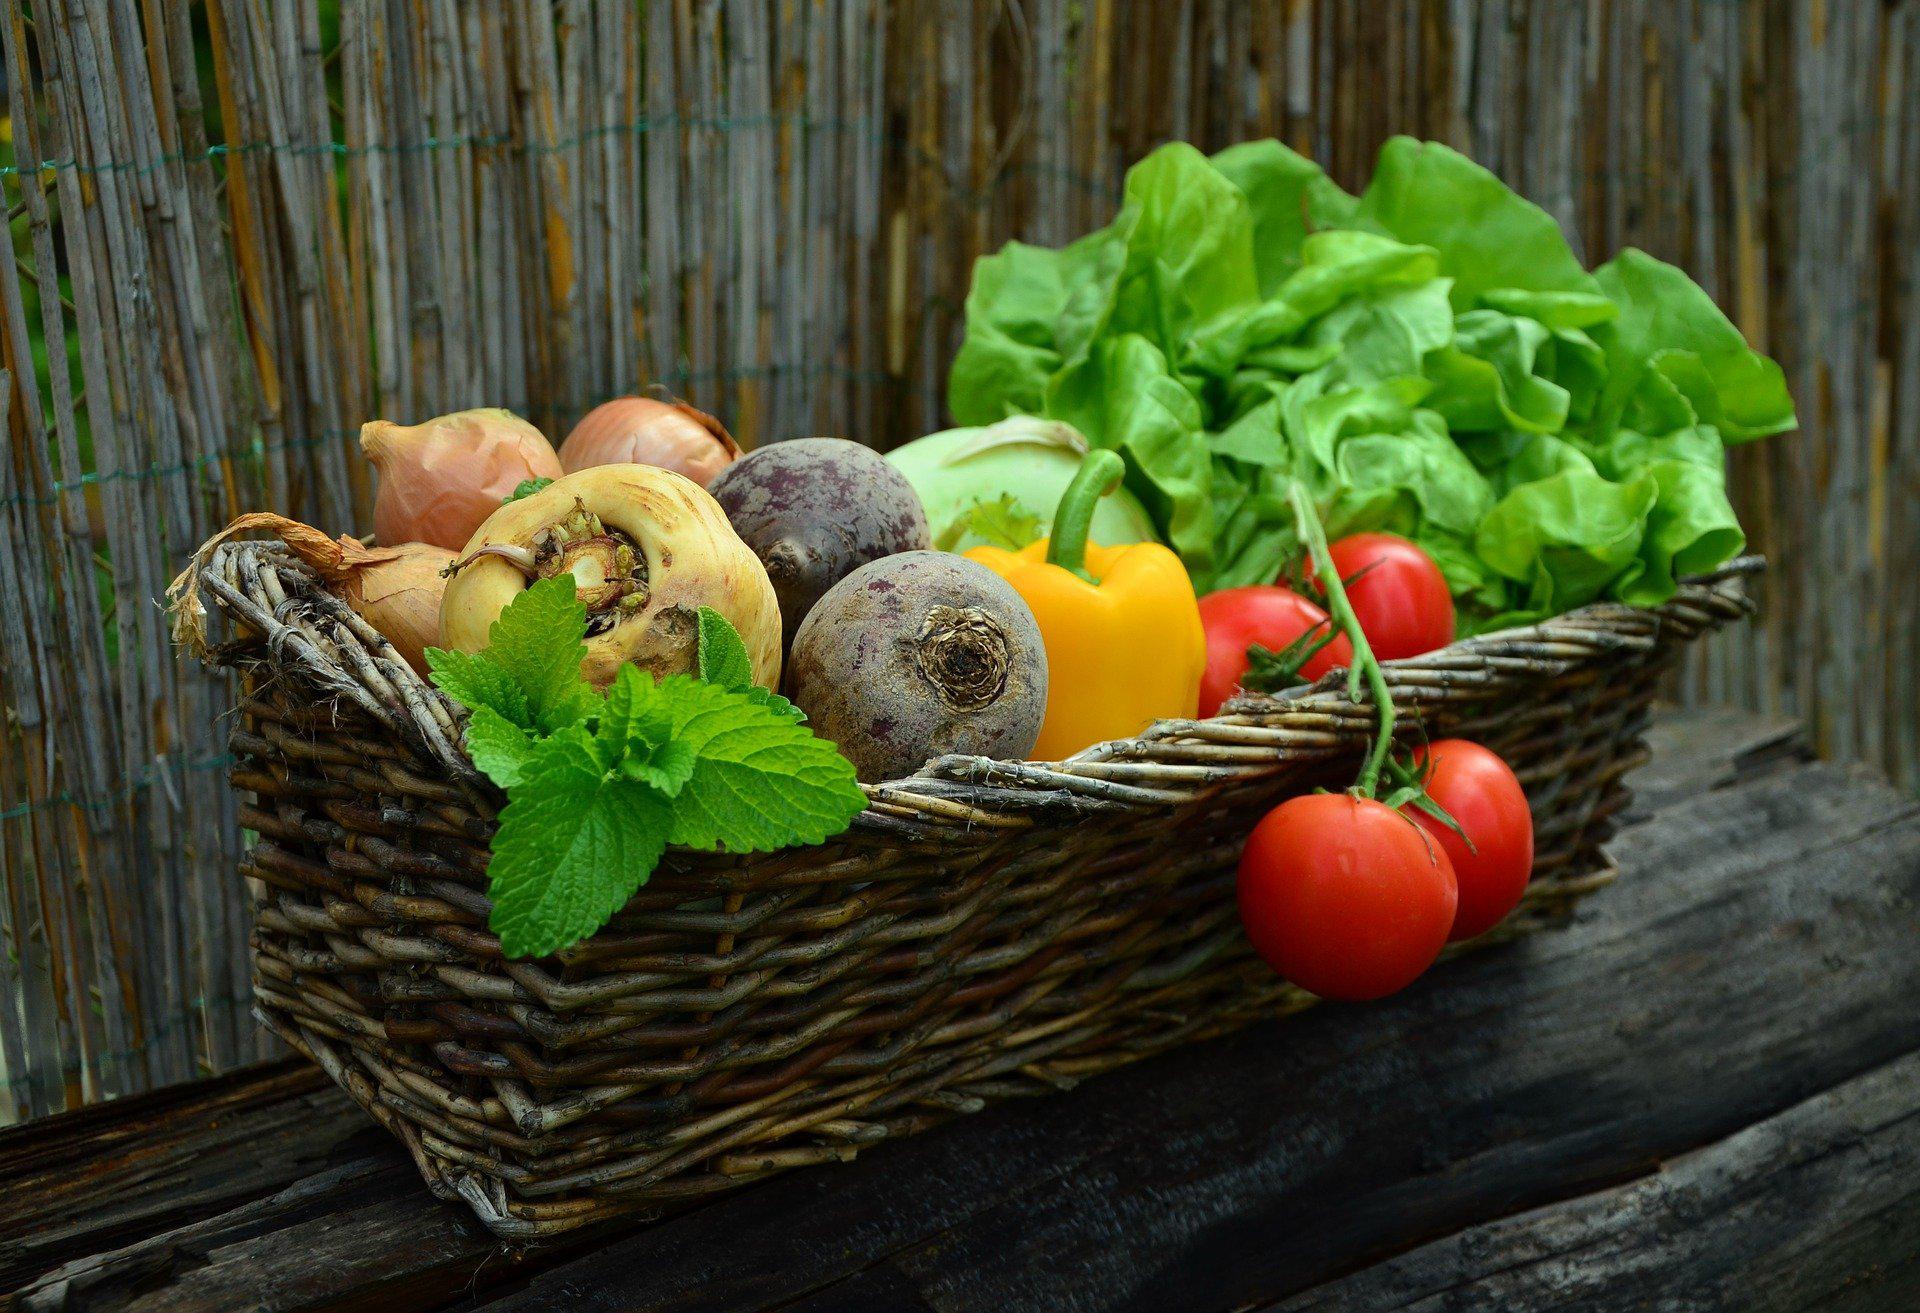 Humanity has been choosing the best vegetables to plant for centuries (Source: Pixabay/congerdesign)